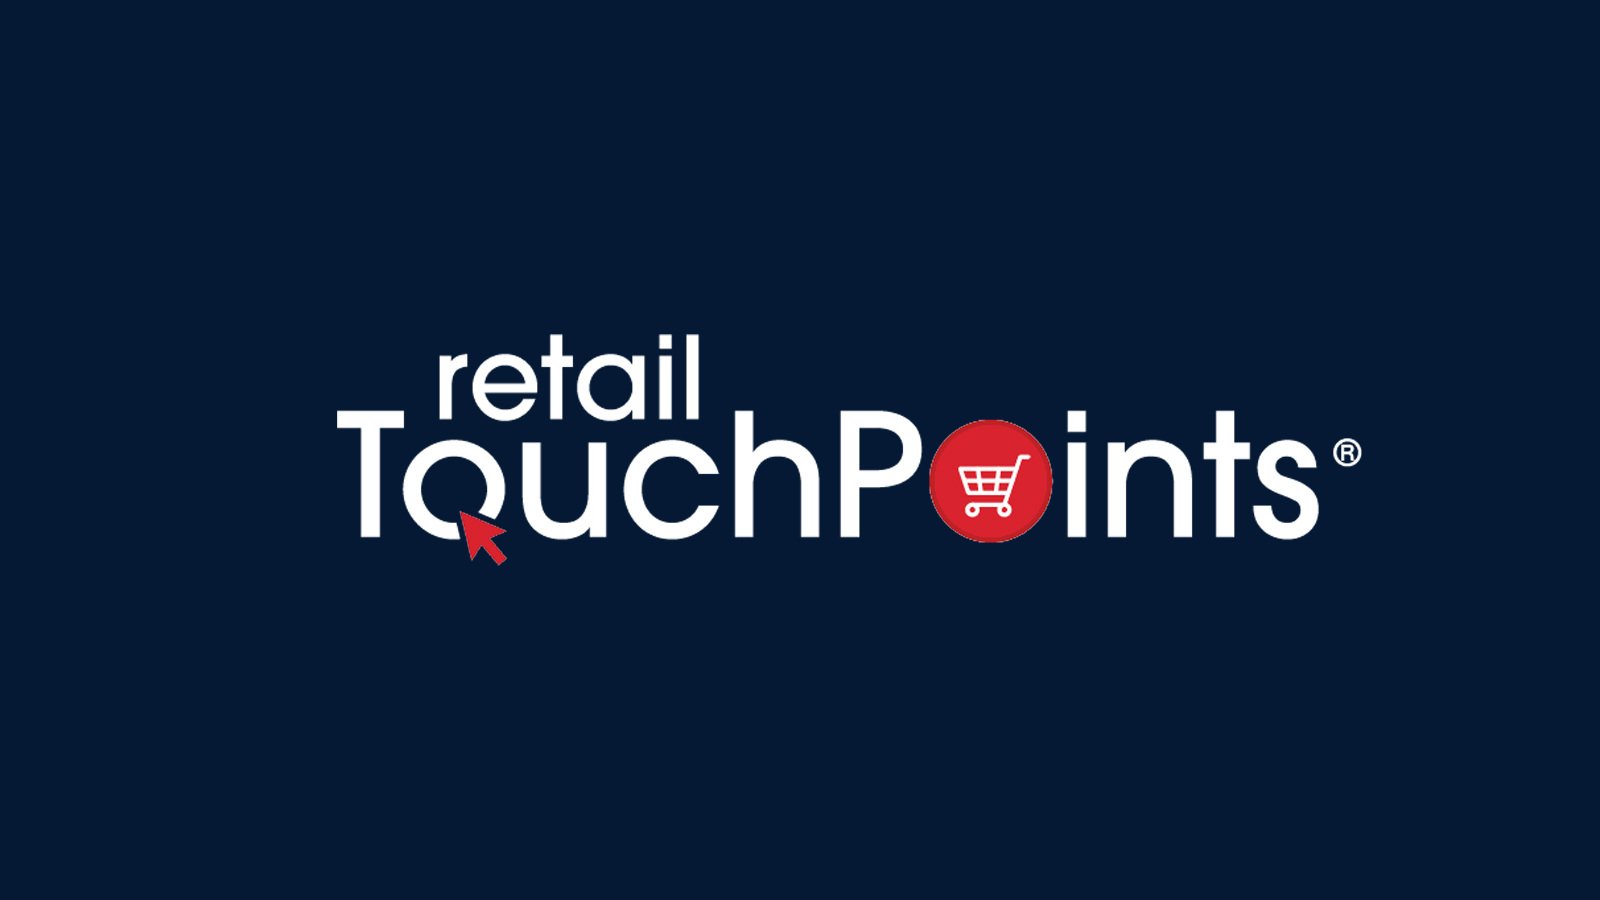 Tesco Leverages AI to Gamify Loyalty Program Challenges [Retail TouchPoints]